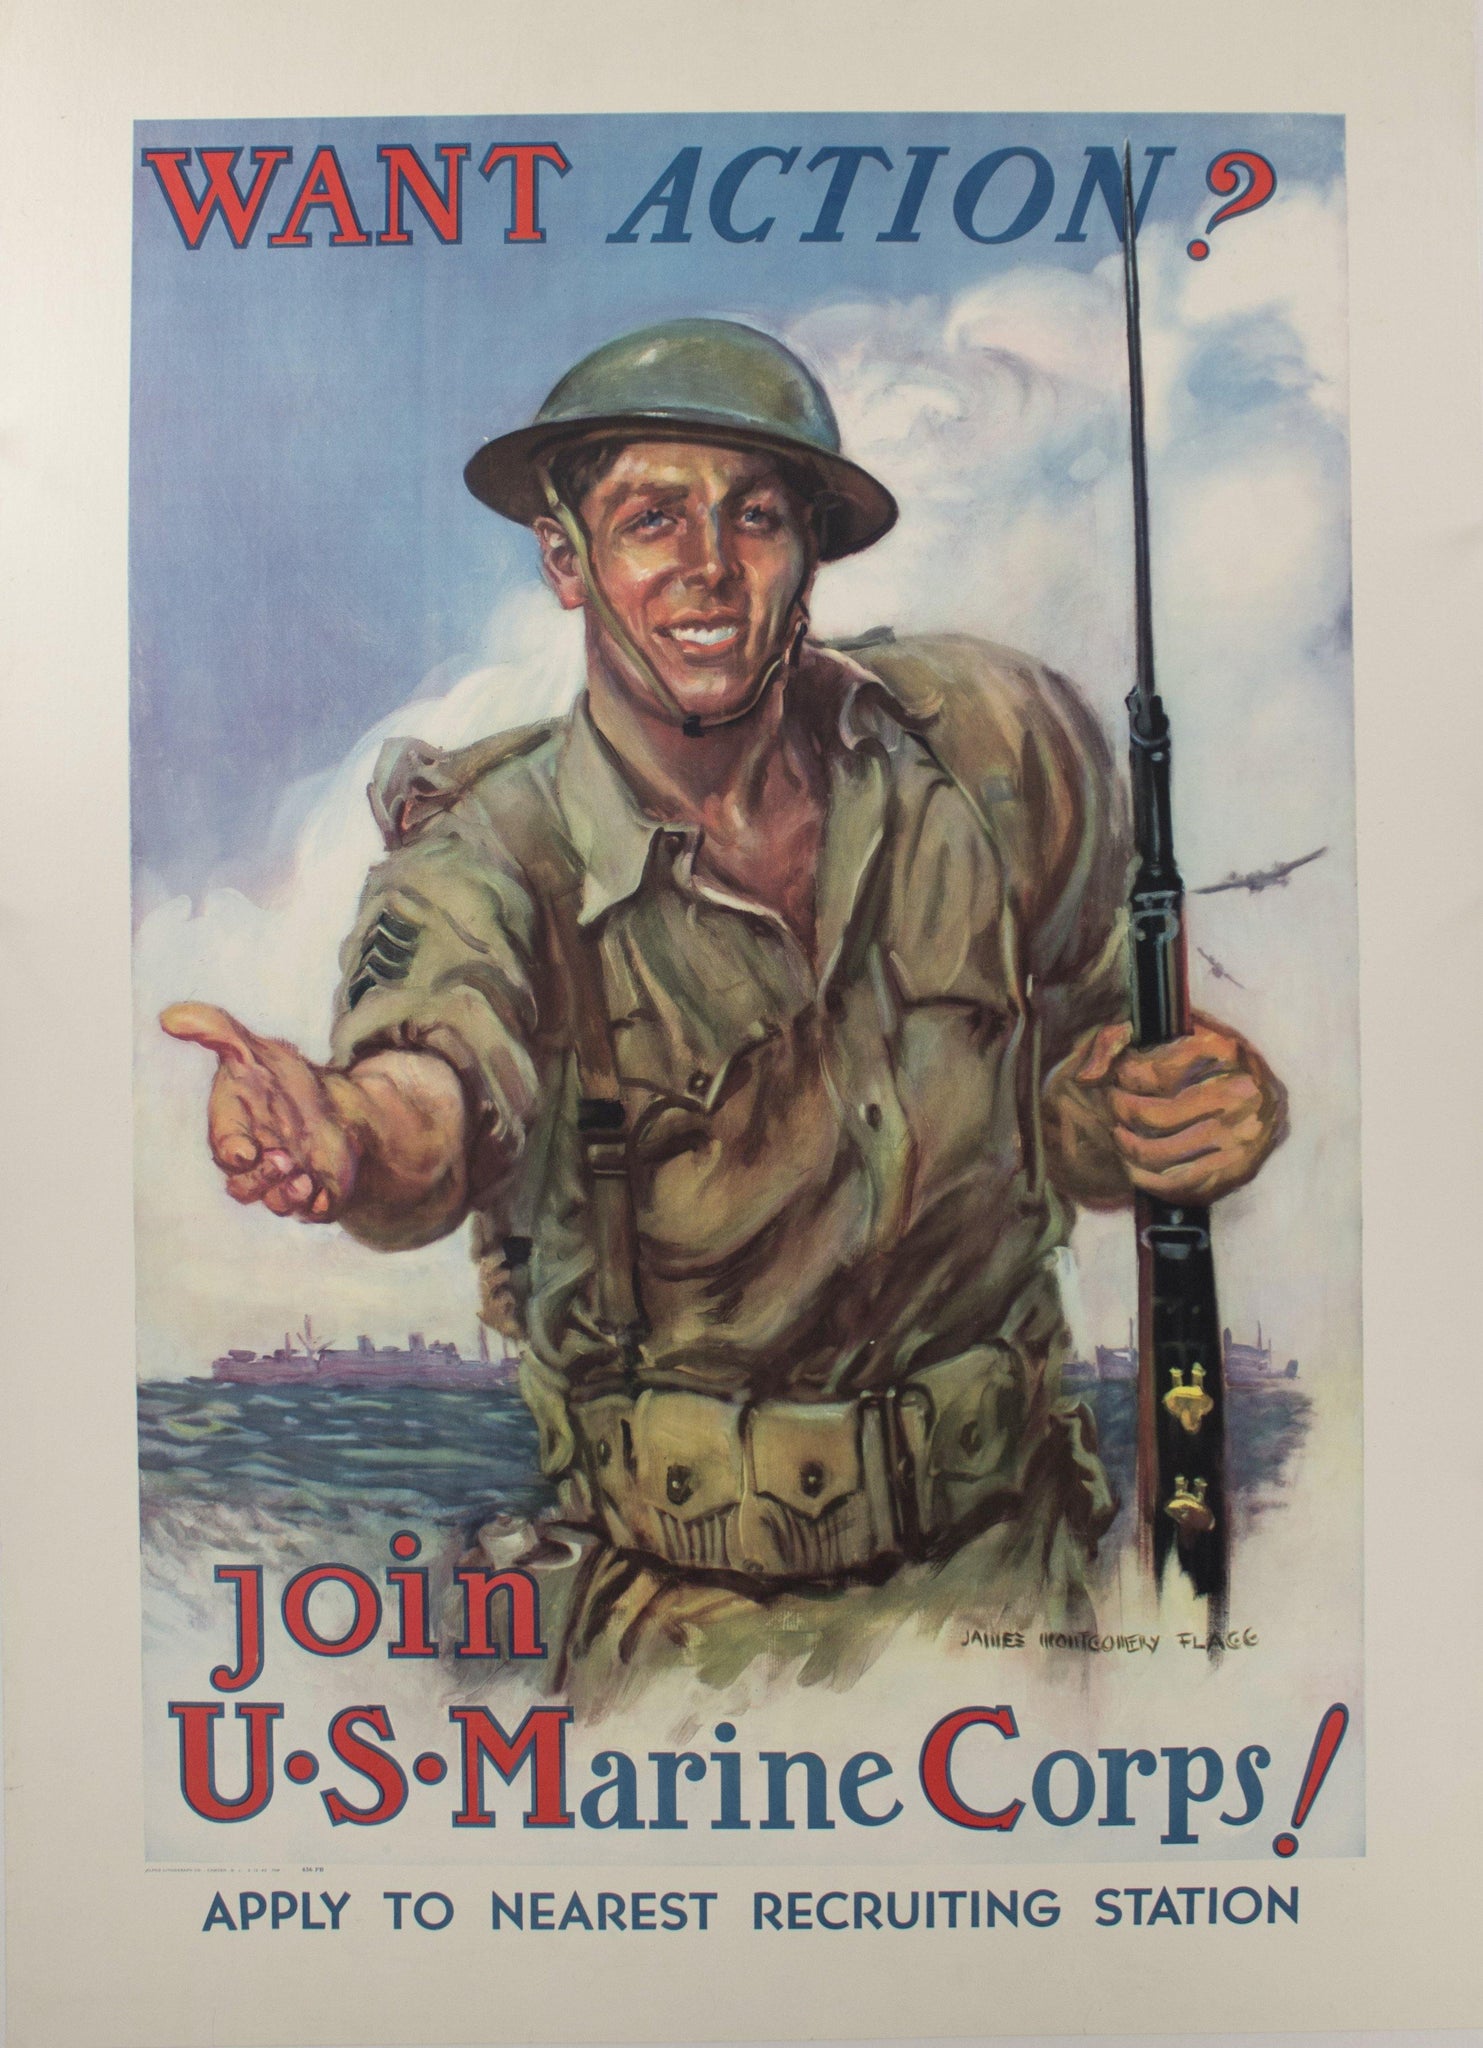 1942 Want Action? Join U. S. Marine Corps.! by James Flagg - Golden Age Posters